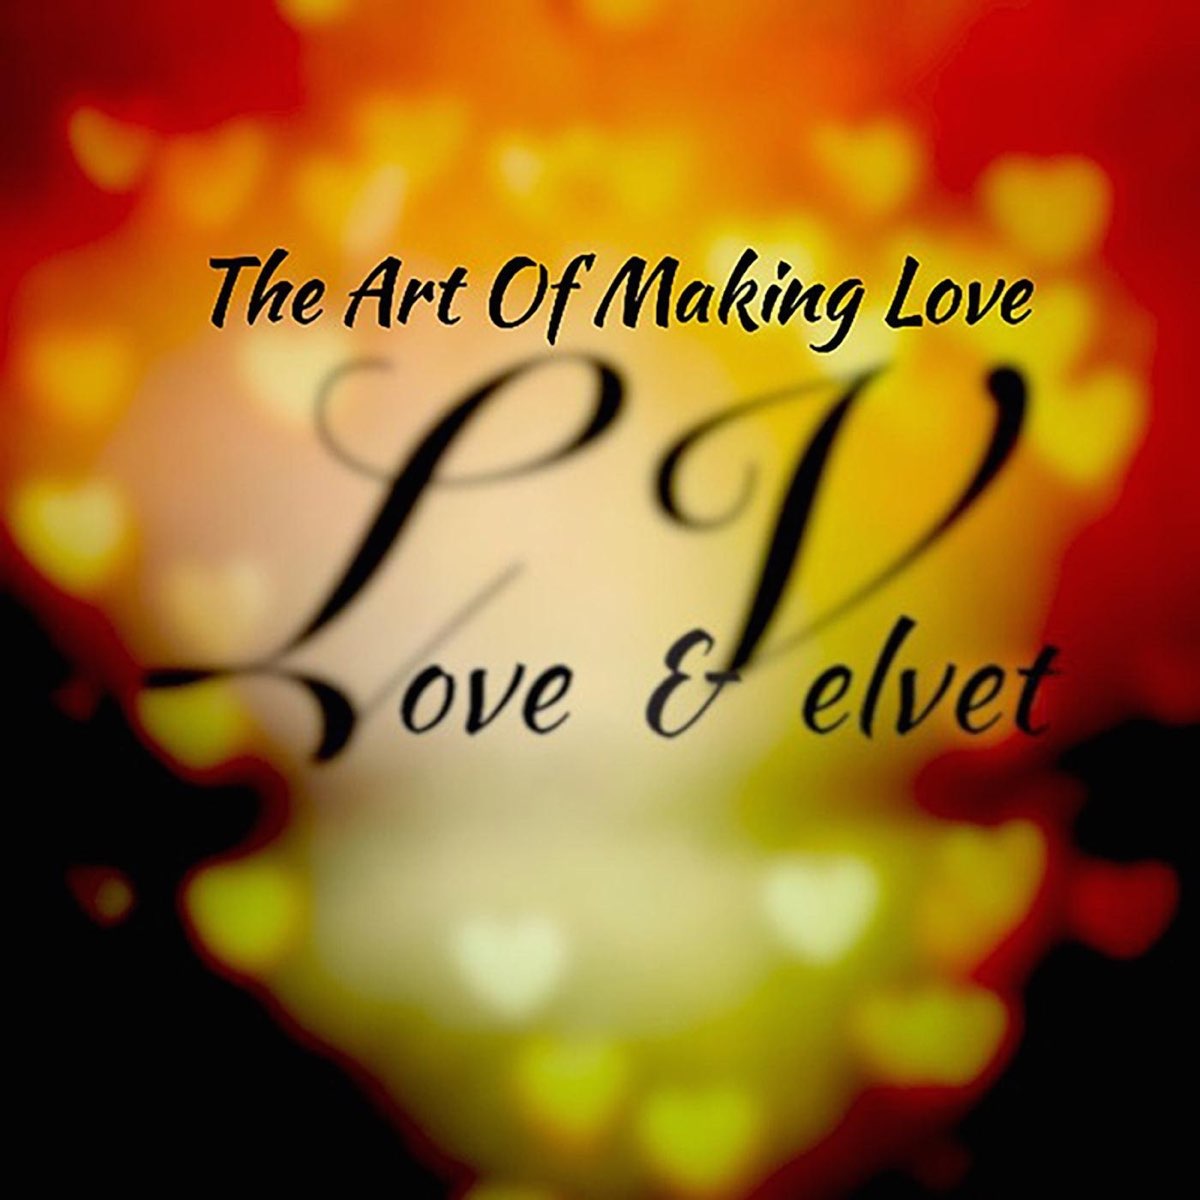 The Art of Making Love by L.V. on Apple Music